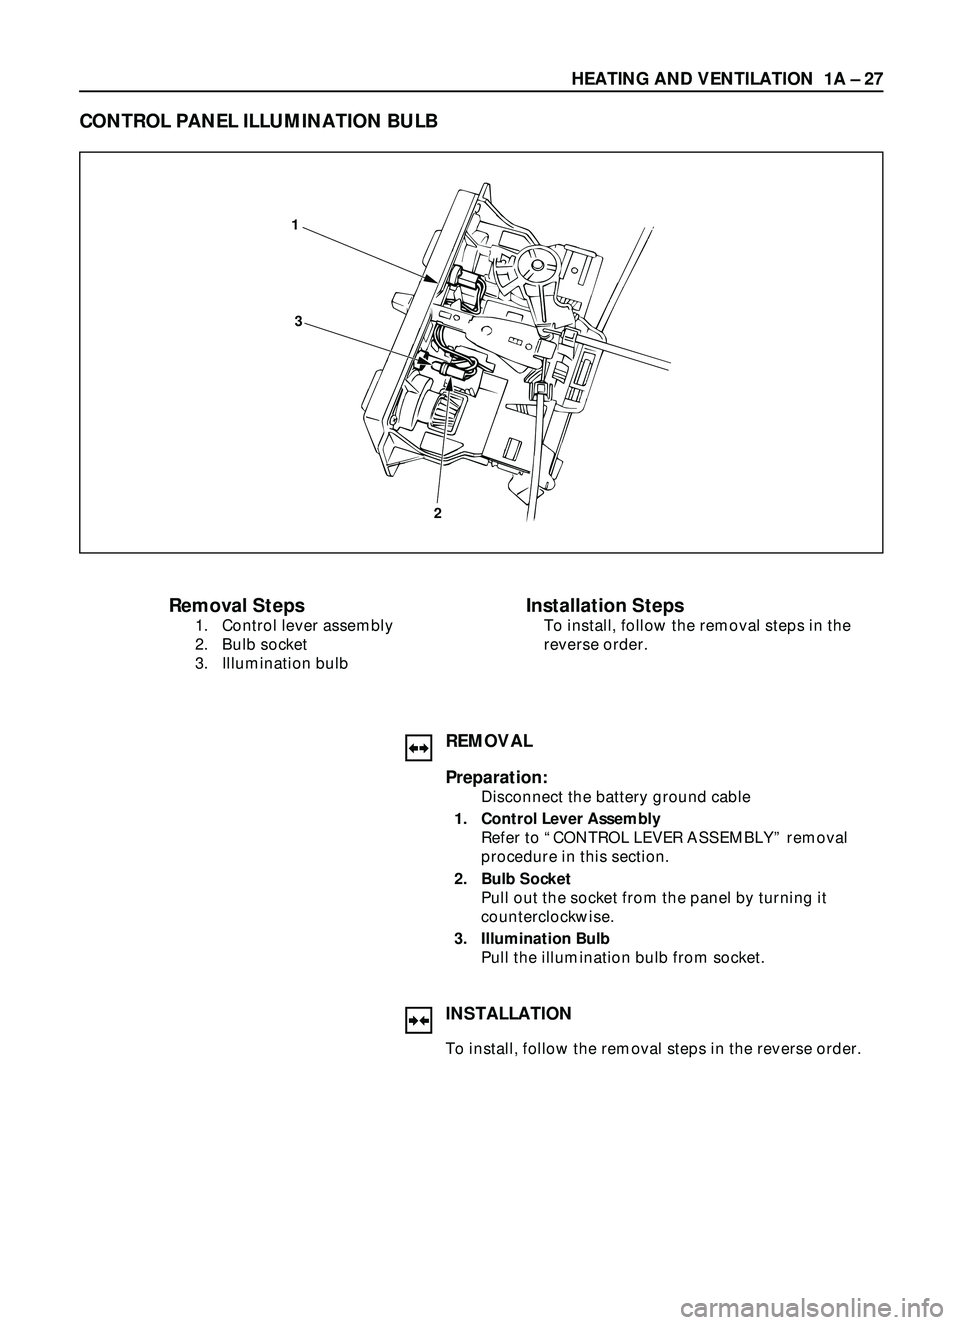 ISUZU TROOPER 1998  Service Repair Manual HEATING AND VENTILATION  1A Ð 27
Removal Steps
1. Control lever assembly
2. Bulb socket
3. Illumination bulb
Installation Steps
To install, follow the removal steps in the
reverse order.
CONTROL PANE